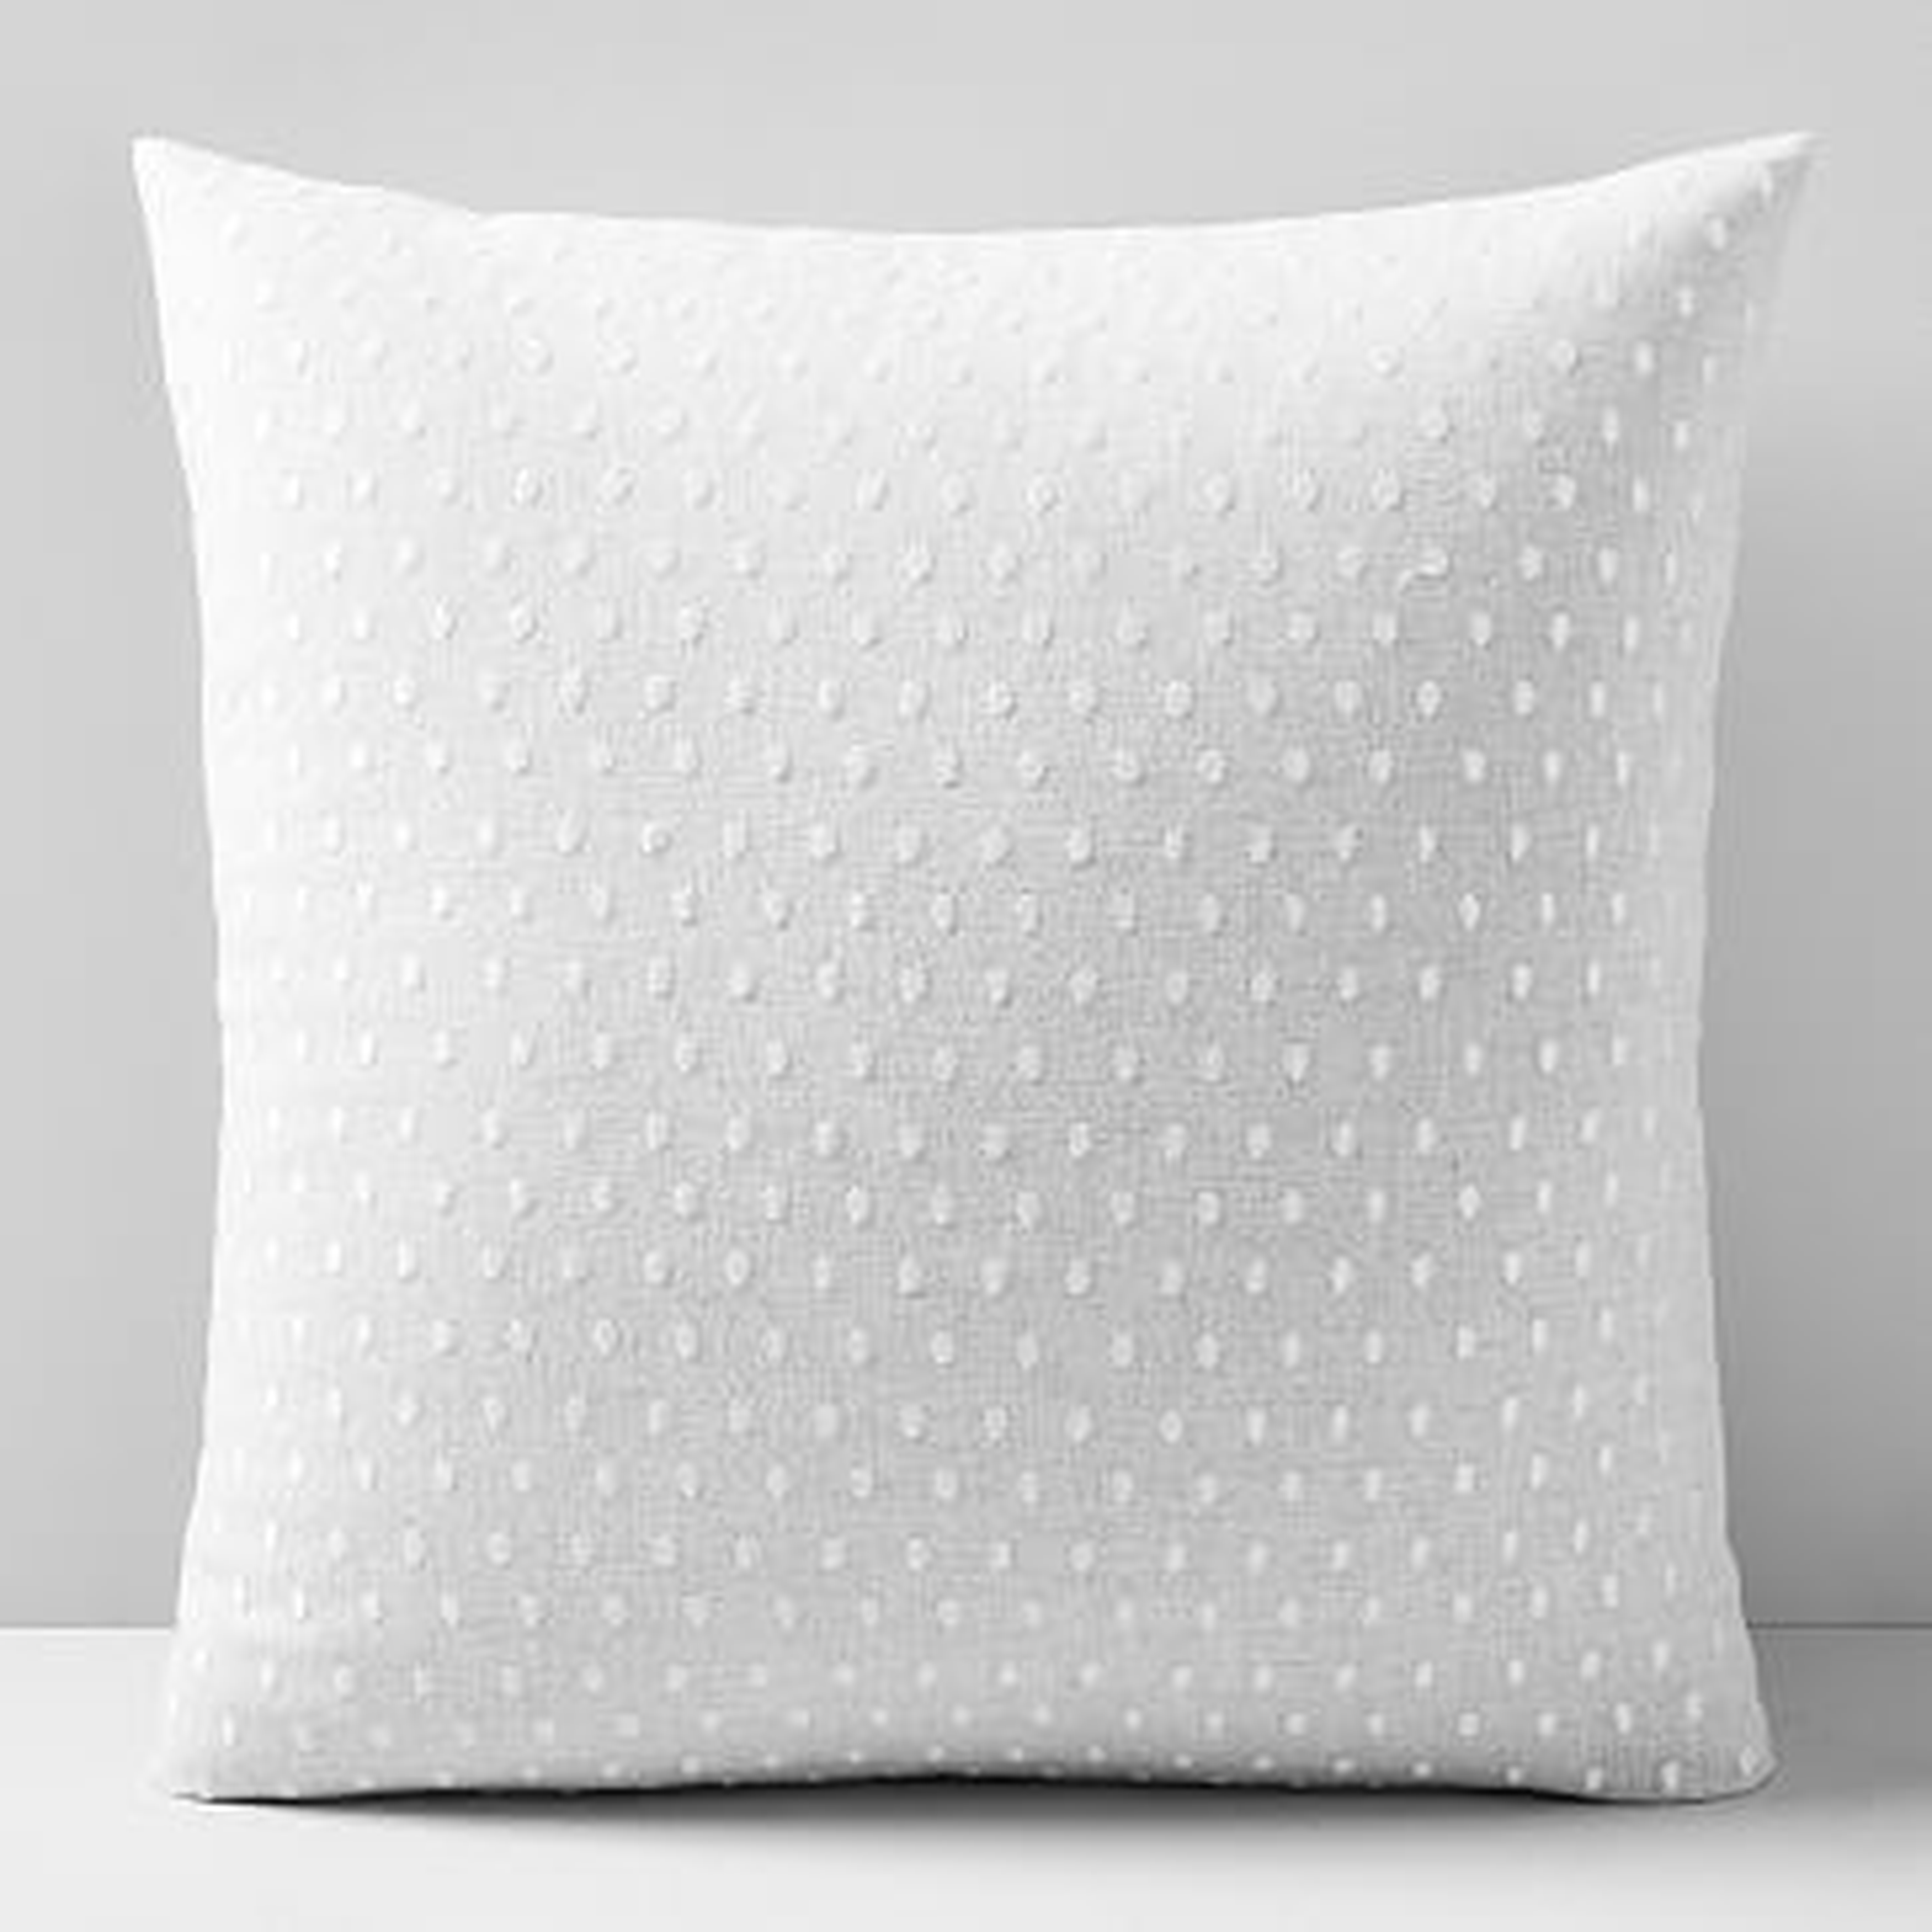 Embroidered Dot Pillow Cover, 20"x20", Frost Gray - West Elm